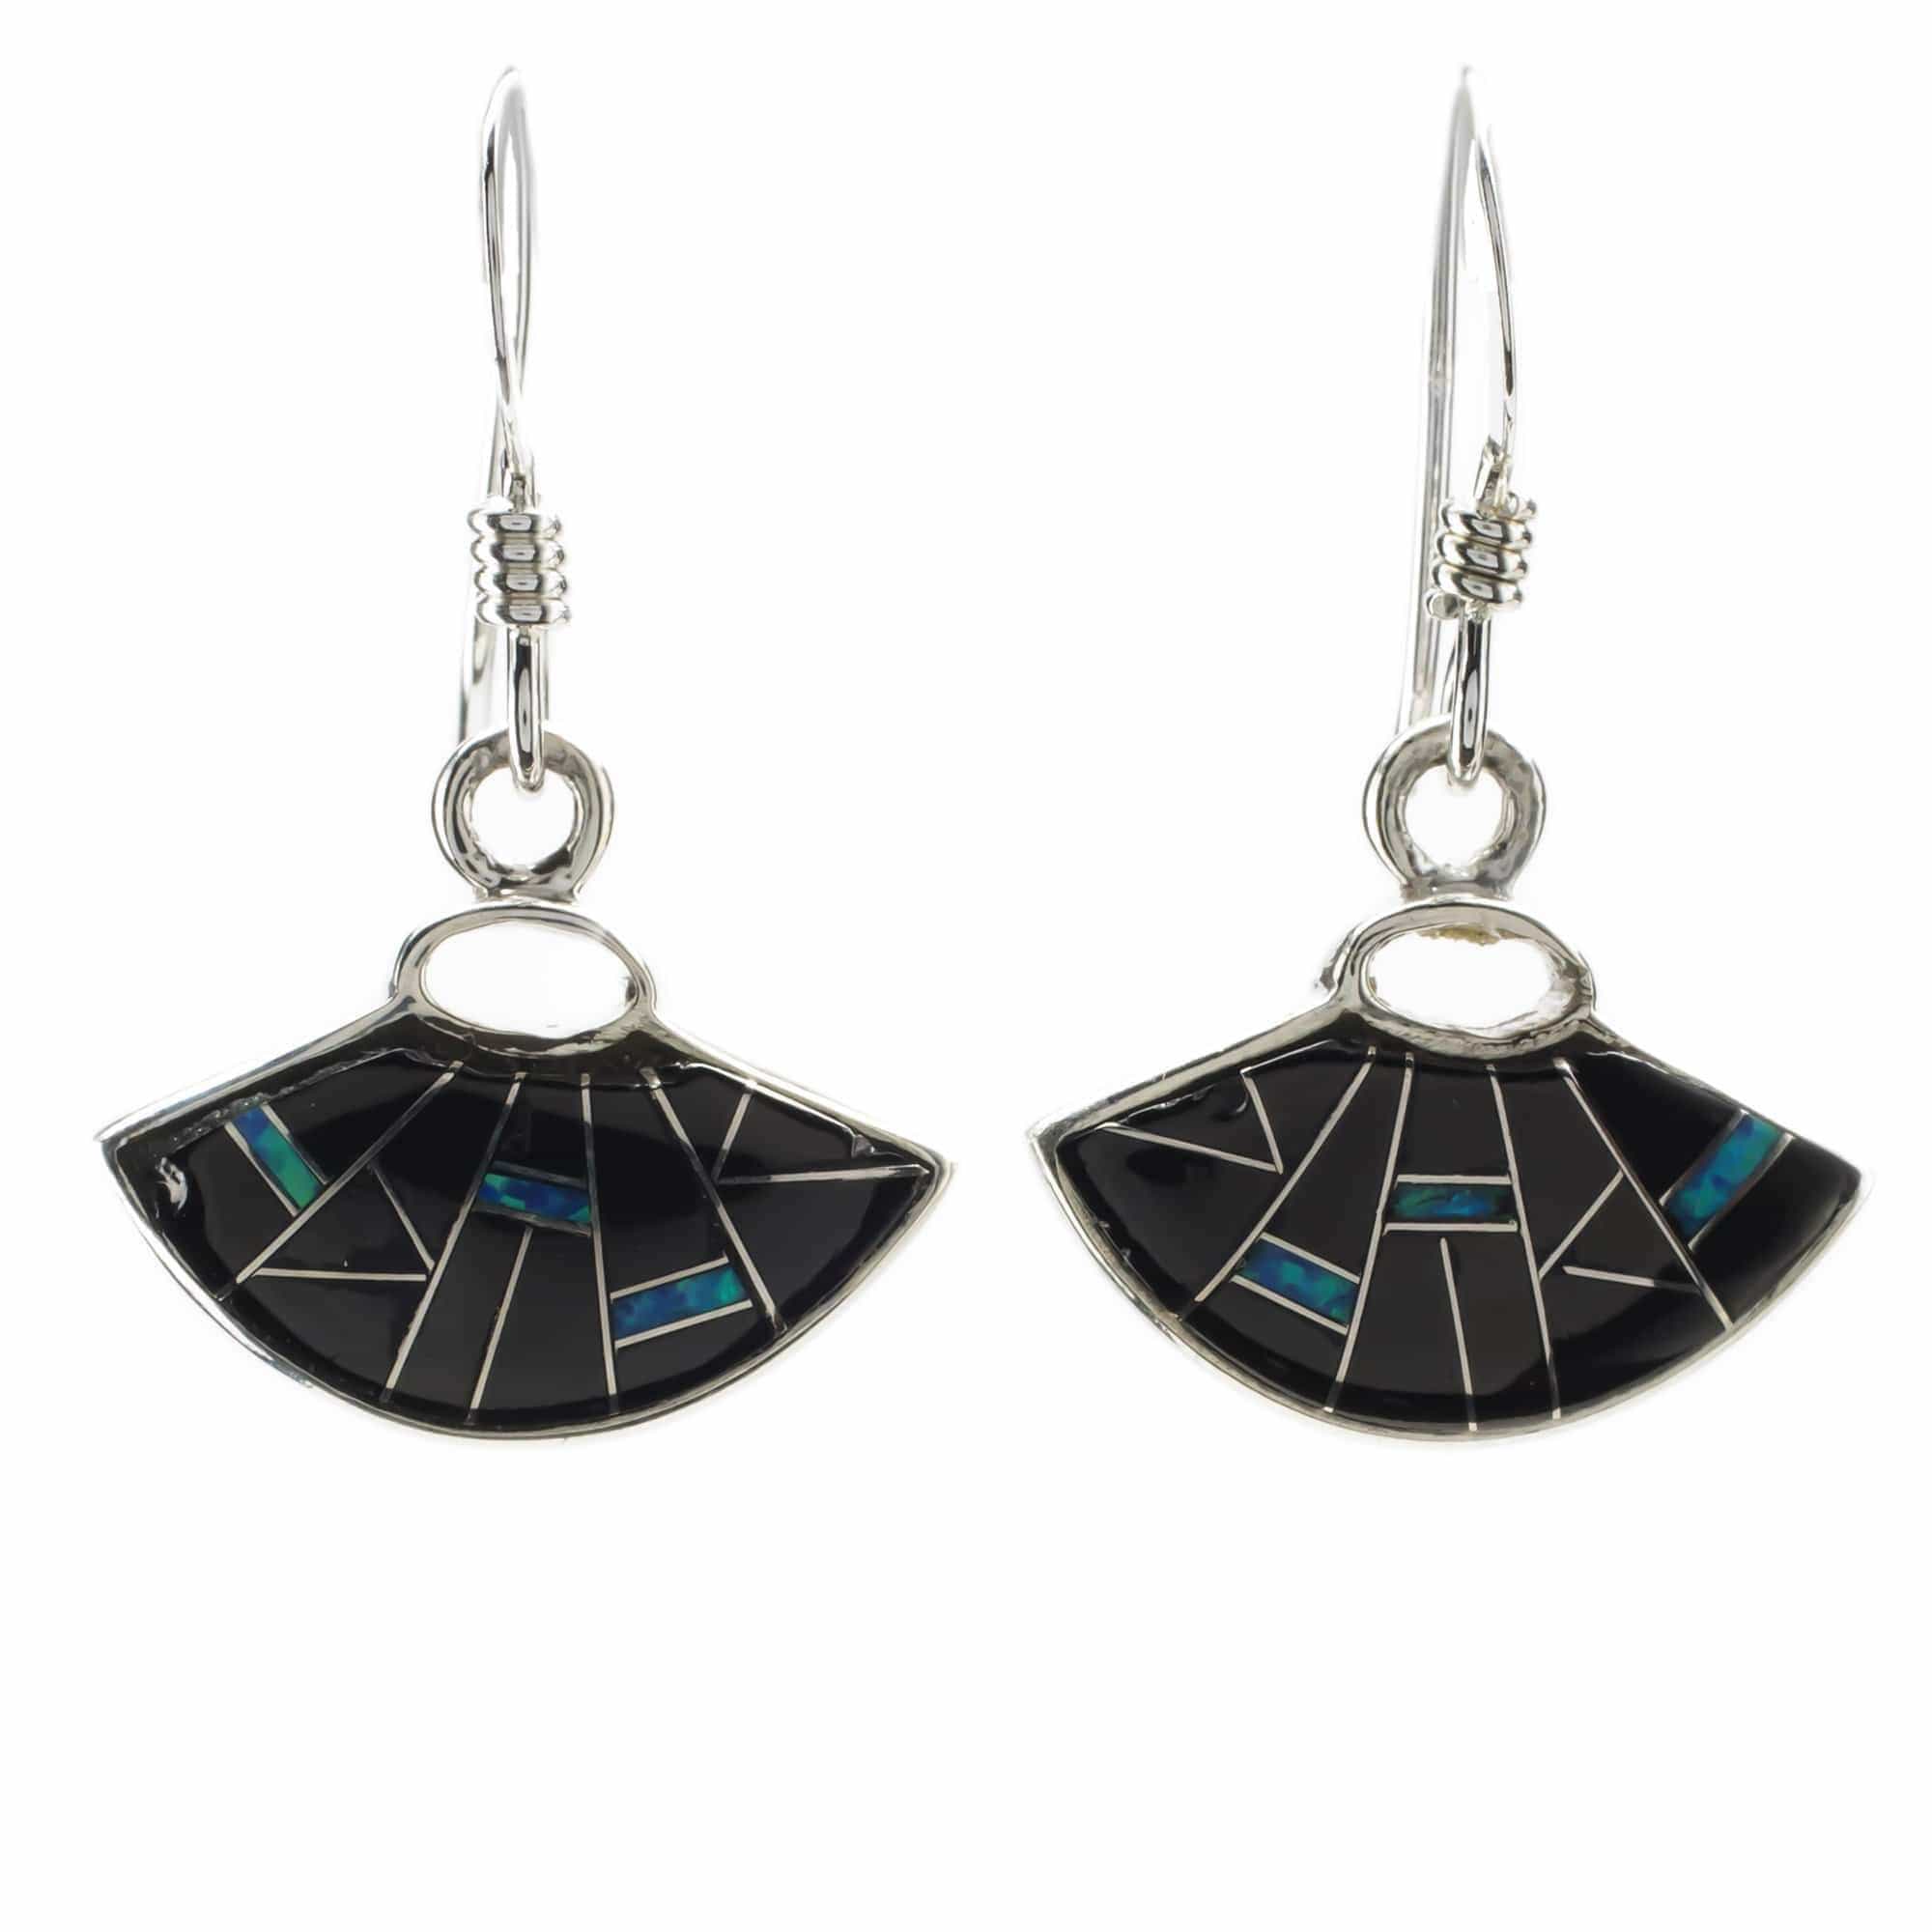 Kalifano Southwest Silver Jewelry Black Onyx Half Circle 925 Sterling Silver Earring with French Hook USA Handmade with Aqua Opal Accent NME.2291.BO